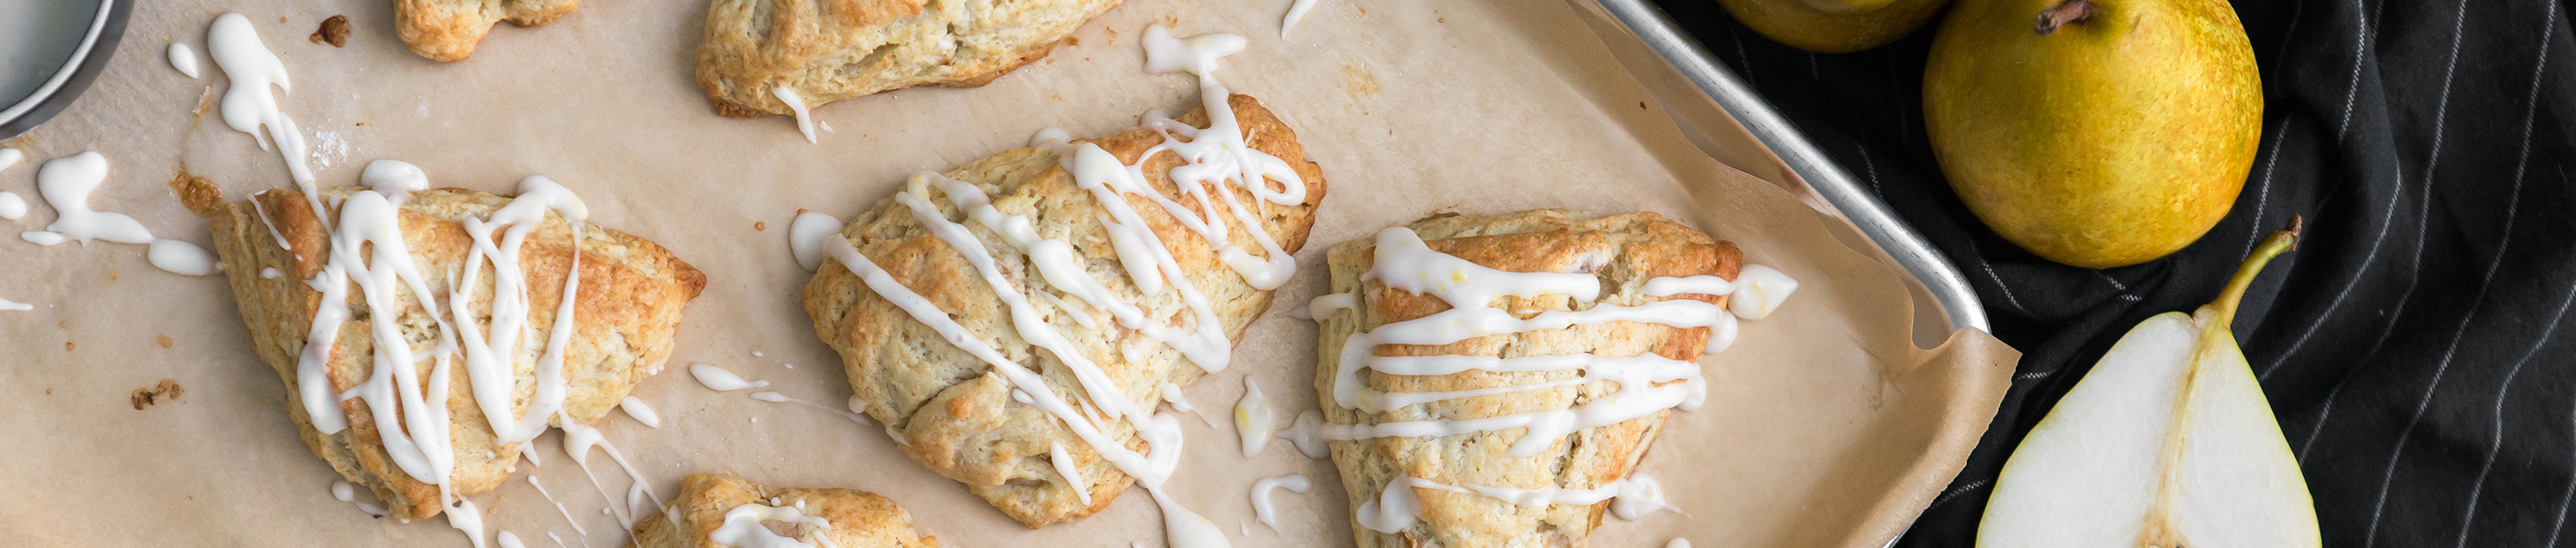 ginger French Butter pear scones with glaze recipe